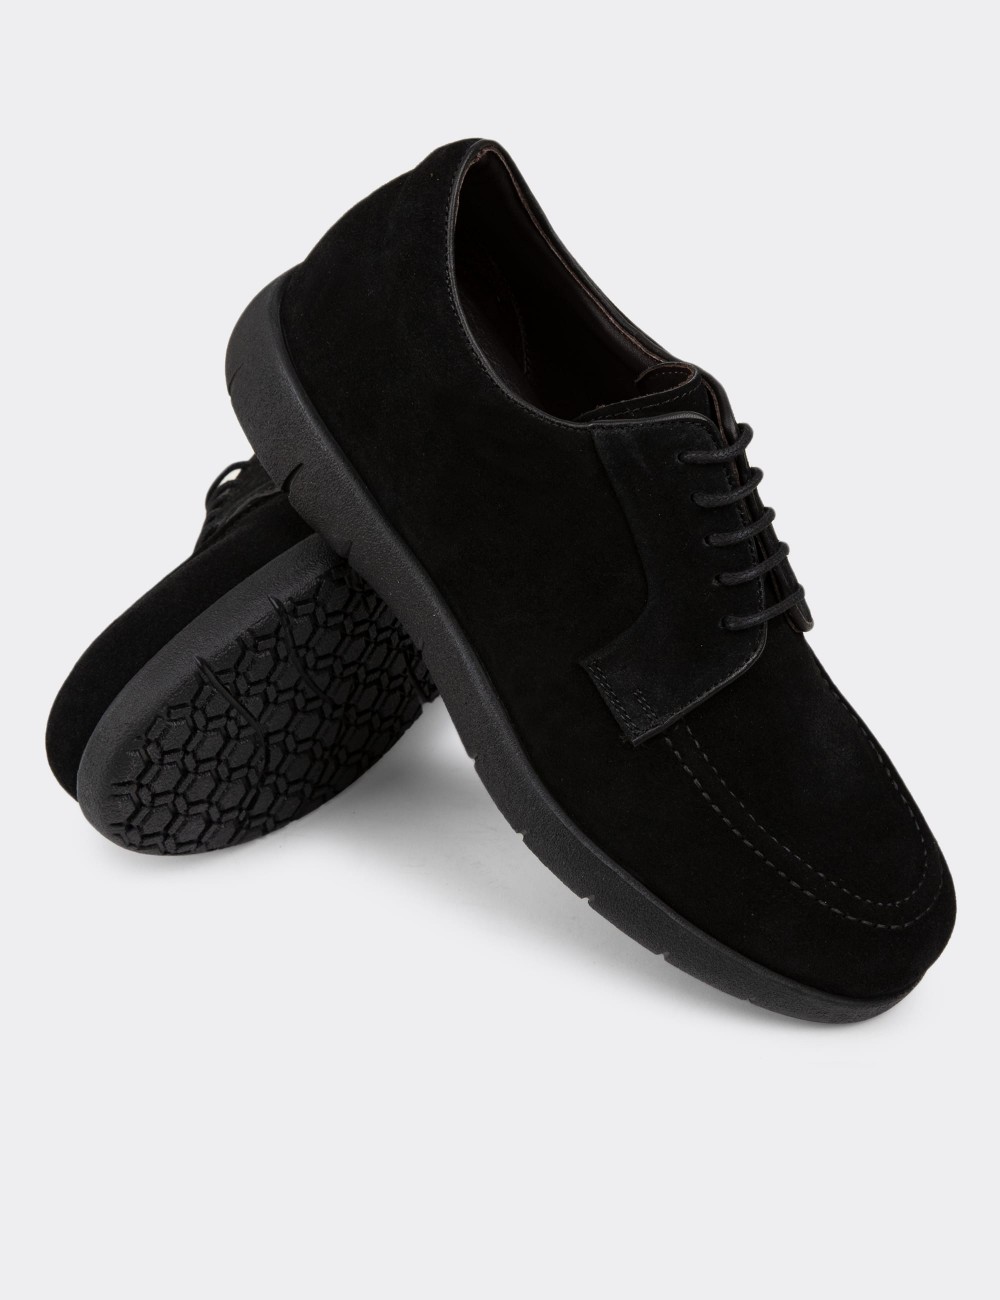 Black Suede Leather Lace-up Shoes - 01930MSYHC01